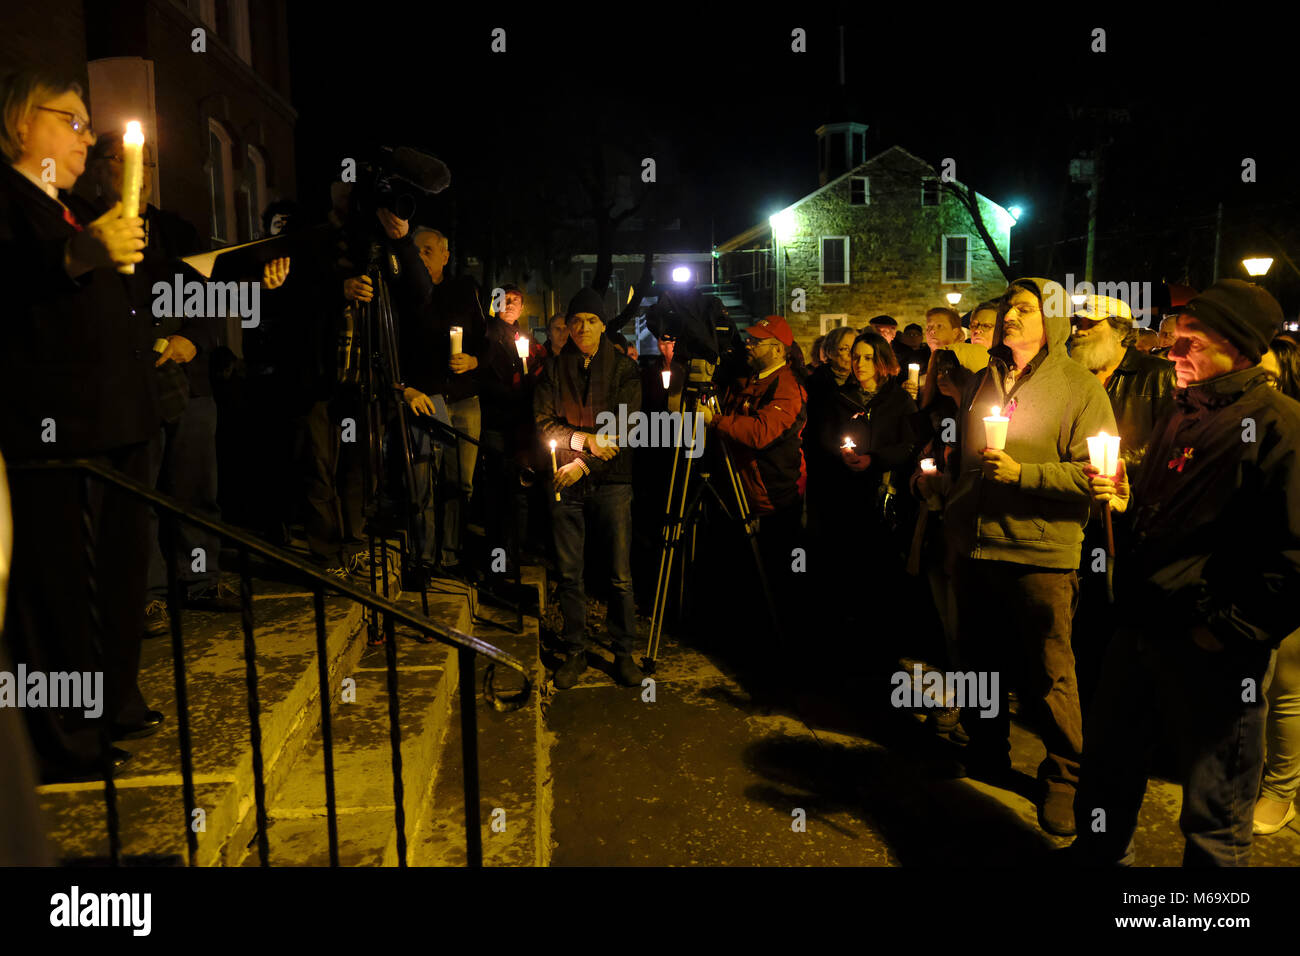 February 28, 2018 - Candlelight Vigil, Milford, PA to honor students that died in school shooting in Parkland Florida Credit: Credit: /ZUMA Wire/Alamy Live News Stock Photo